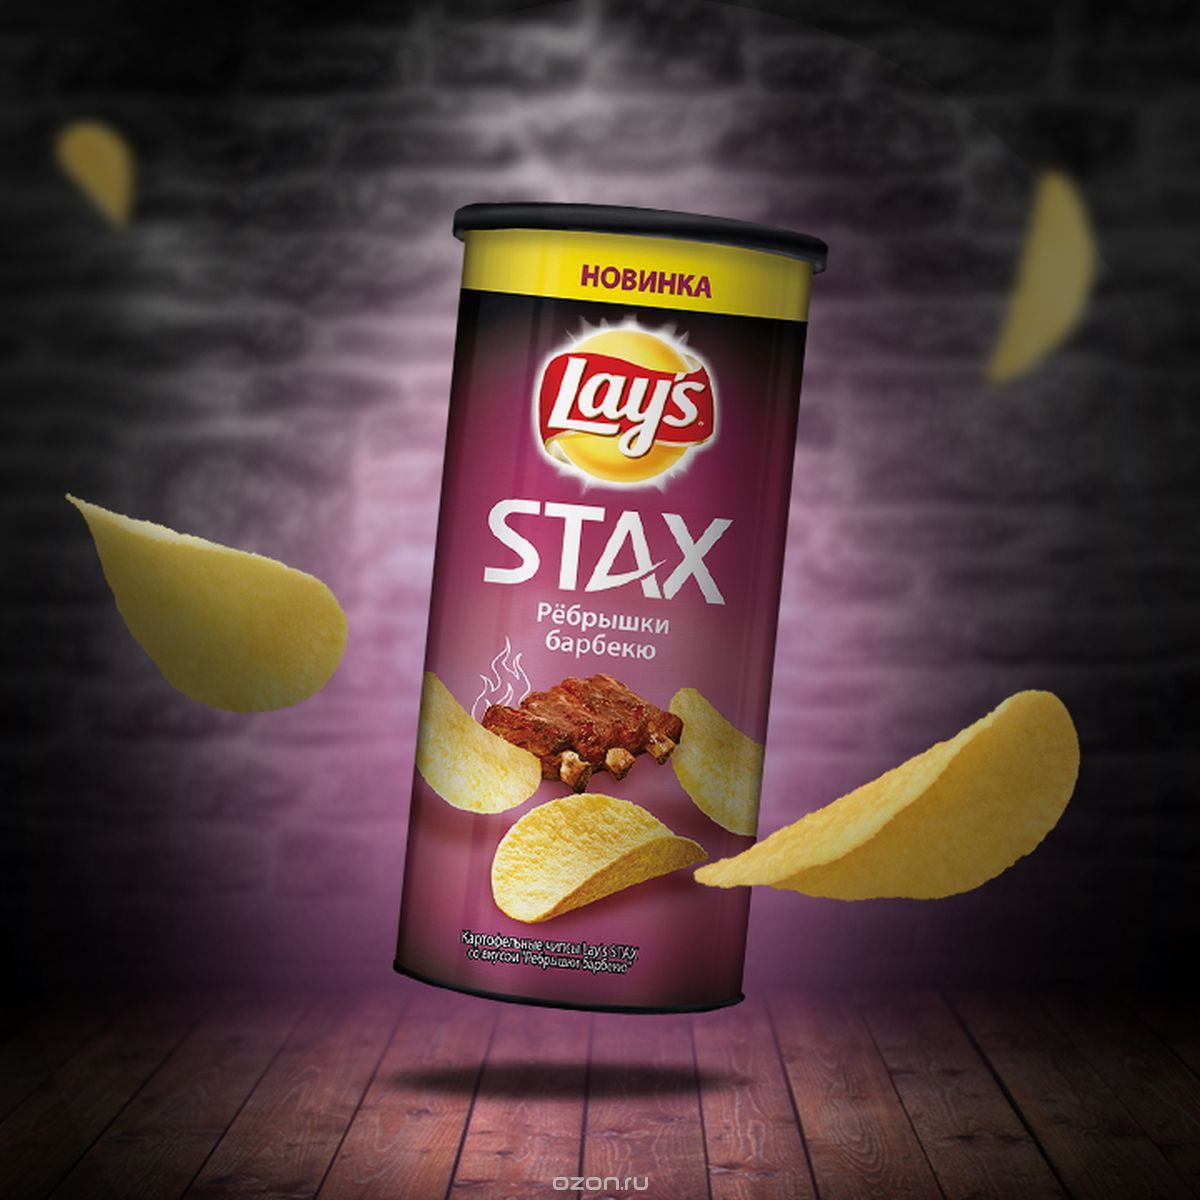 Lay's Stax    , 110 